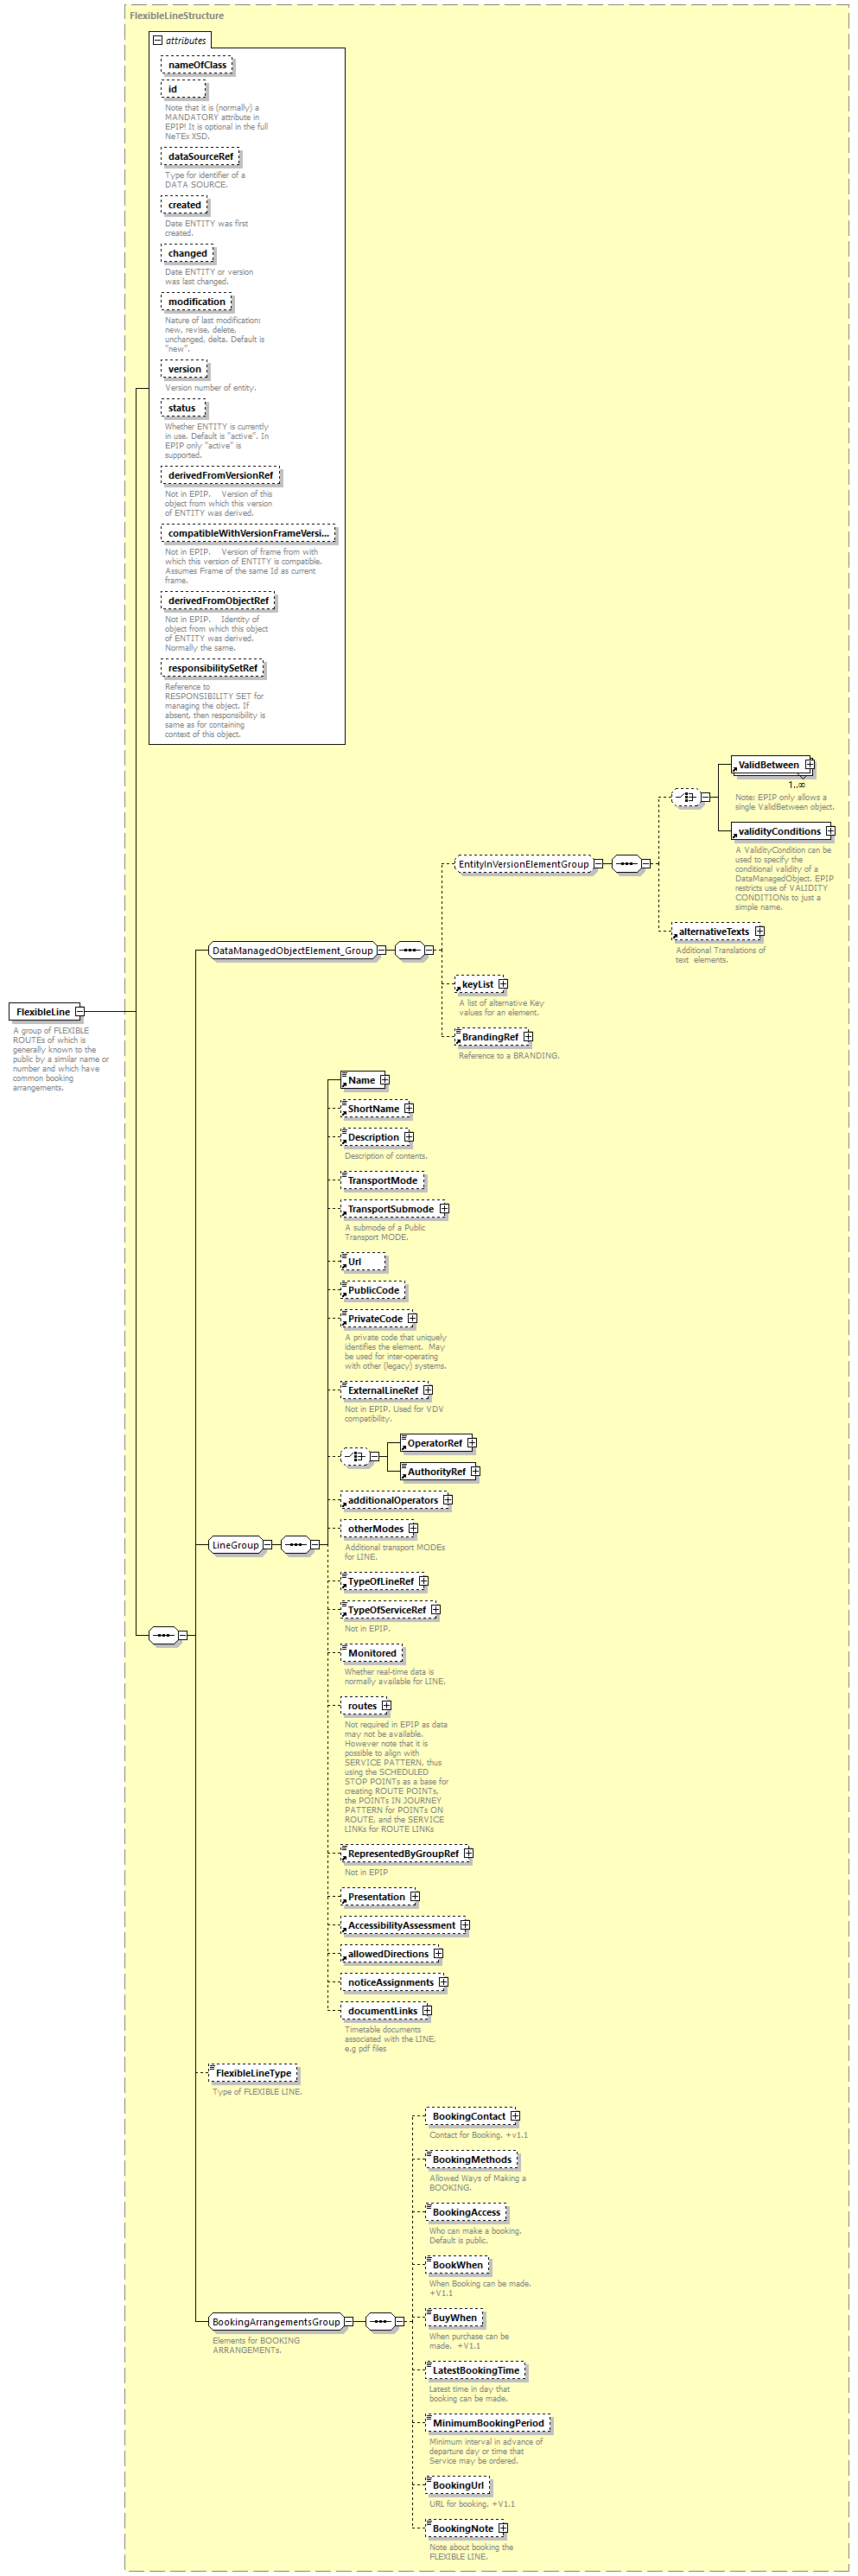 reduced_diagrams/reduced_p169.png